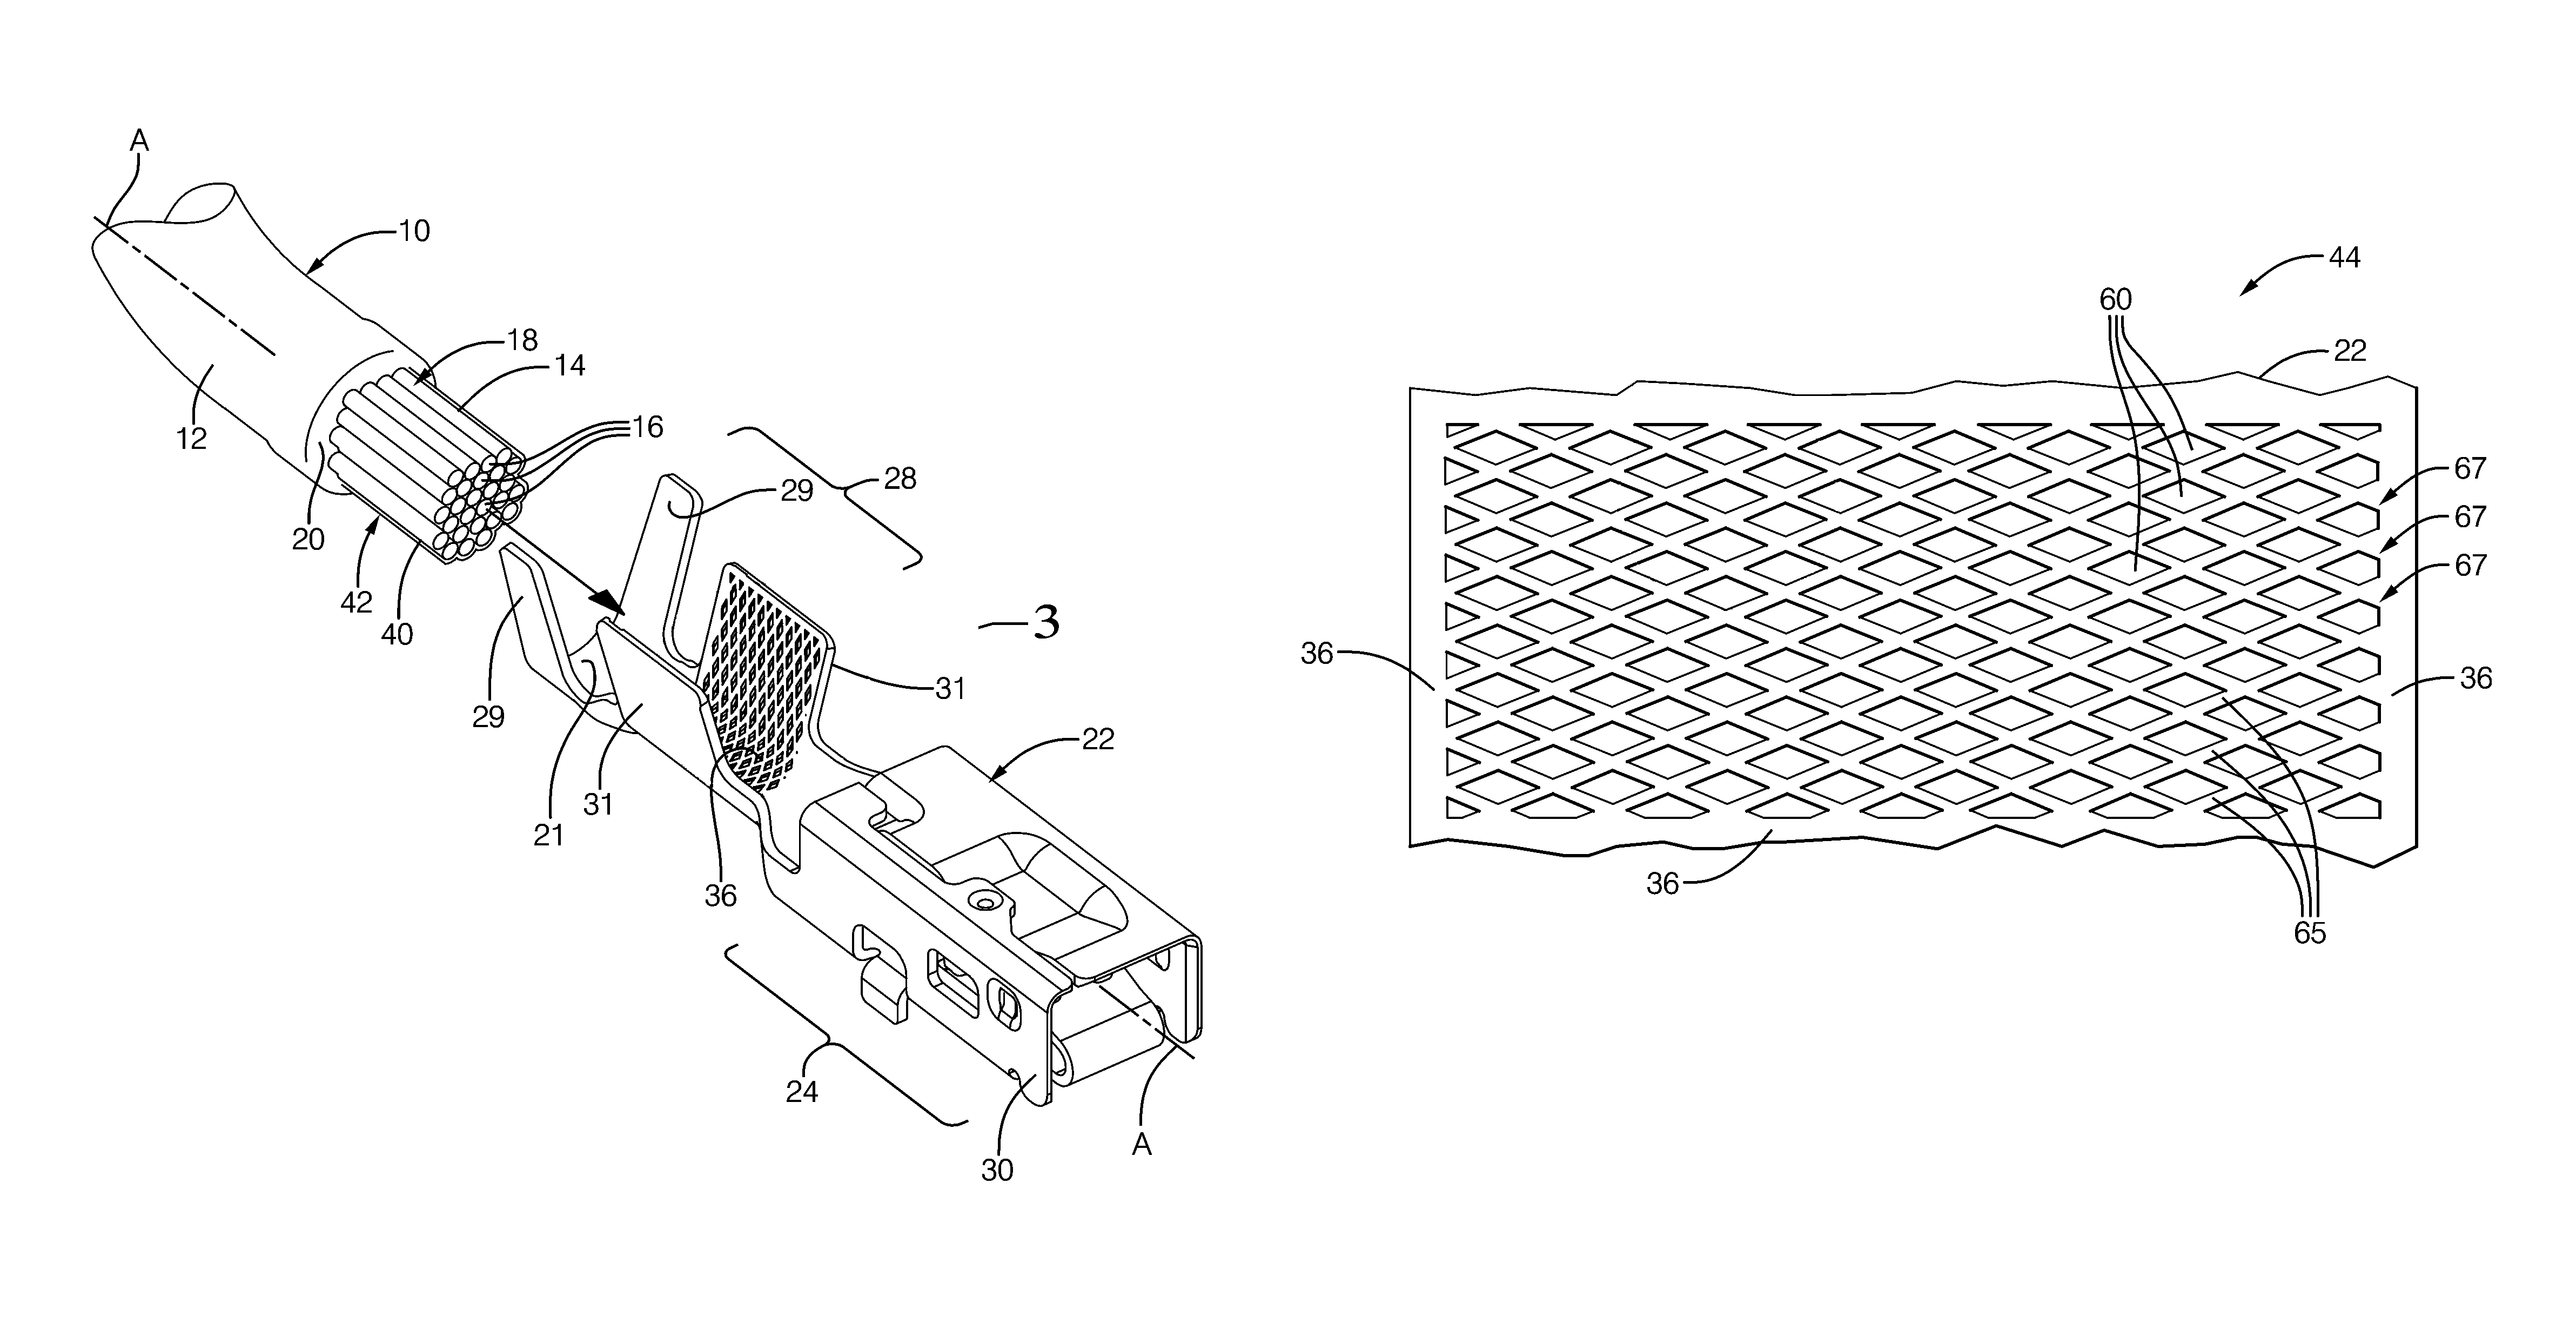 Electrical contact having knurl pattern with recessed rhombic elements that each have an axial minor distance